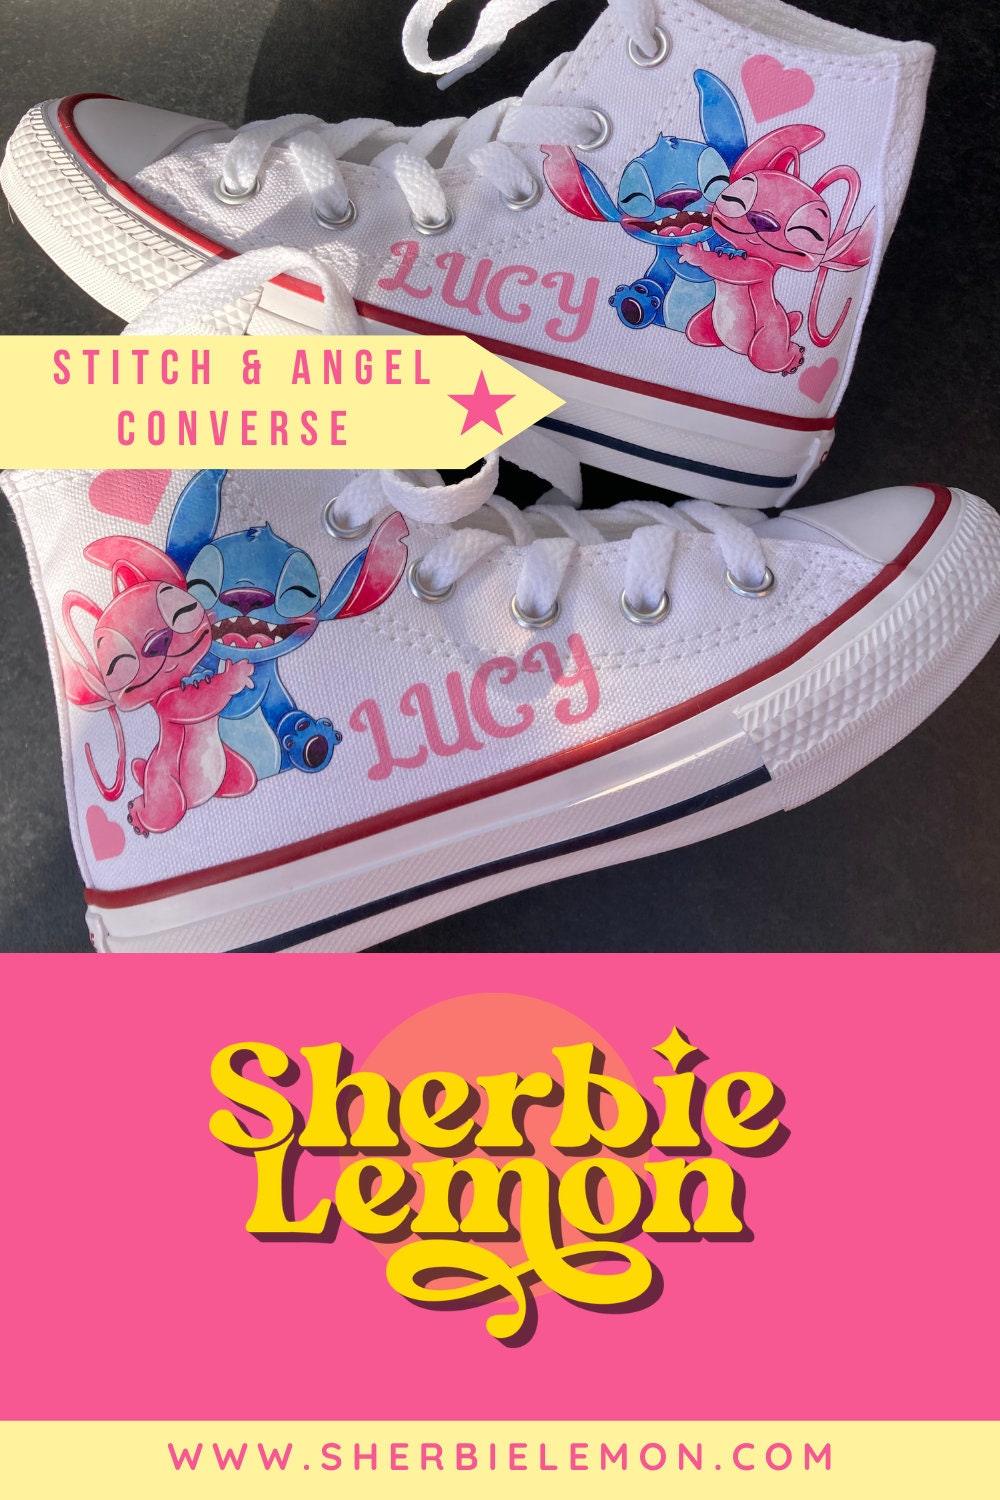 Lilo and Stitch Shoes- Lilo and Stitch Converse-Girls Lilo and Stitch in Wonderland Shoes-Lilo and Angel Shoes 3C